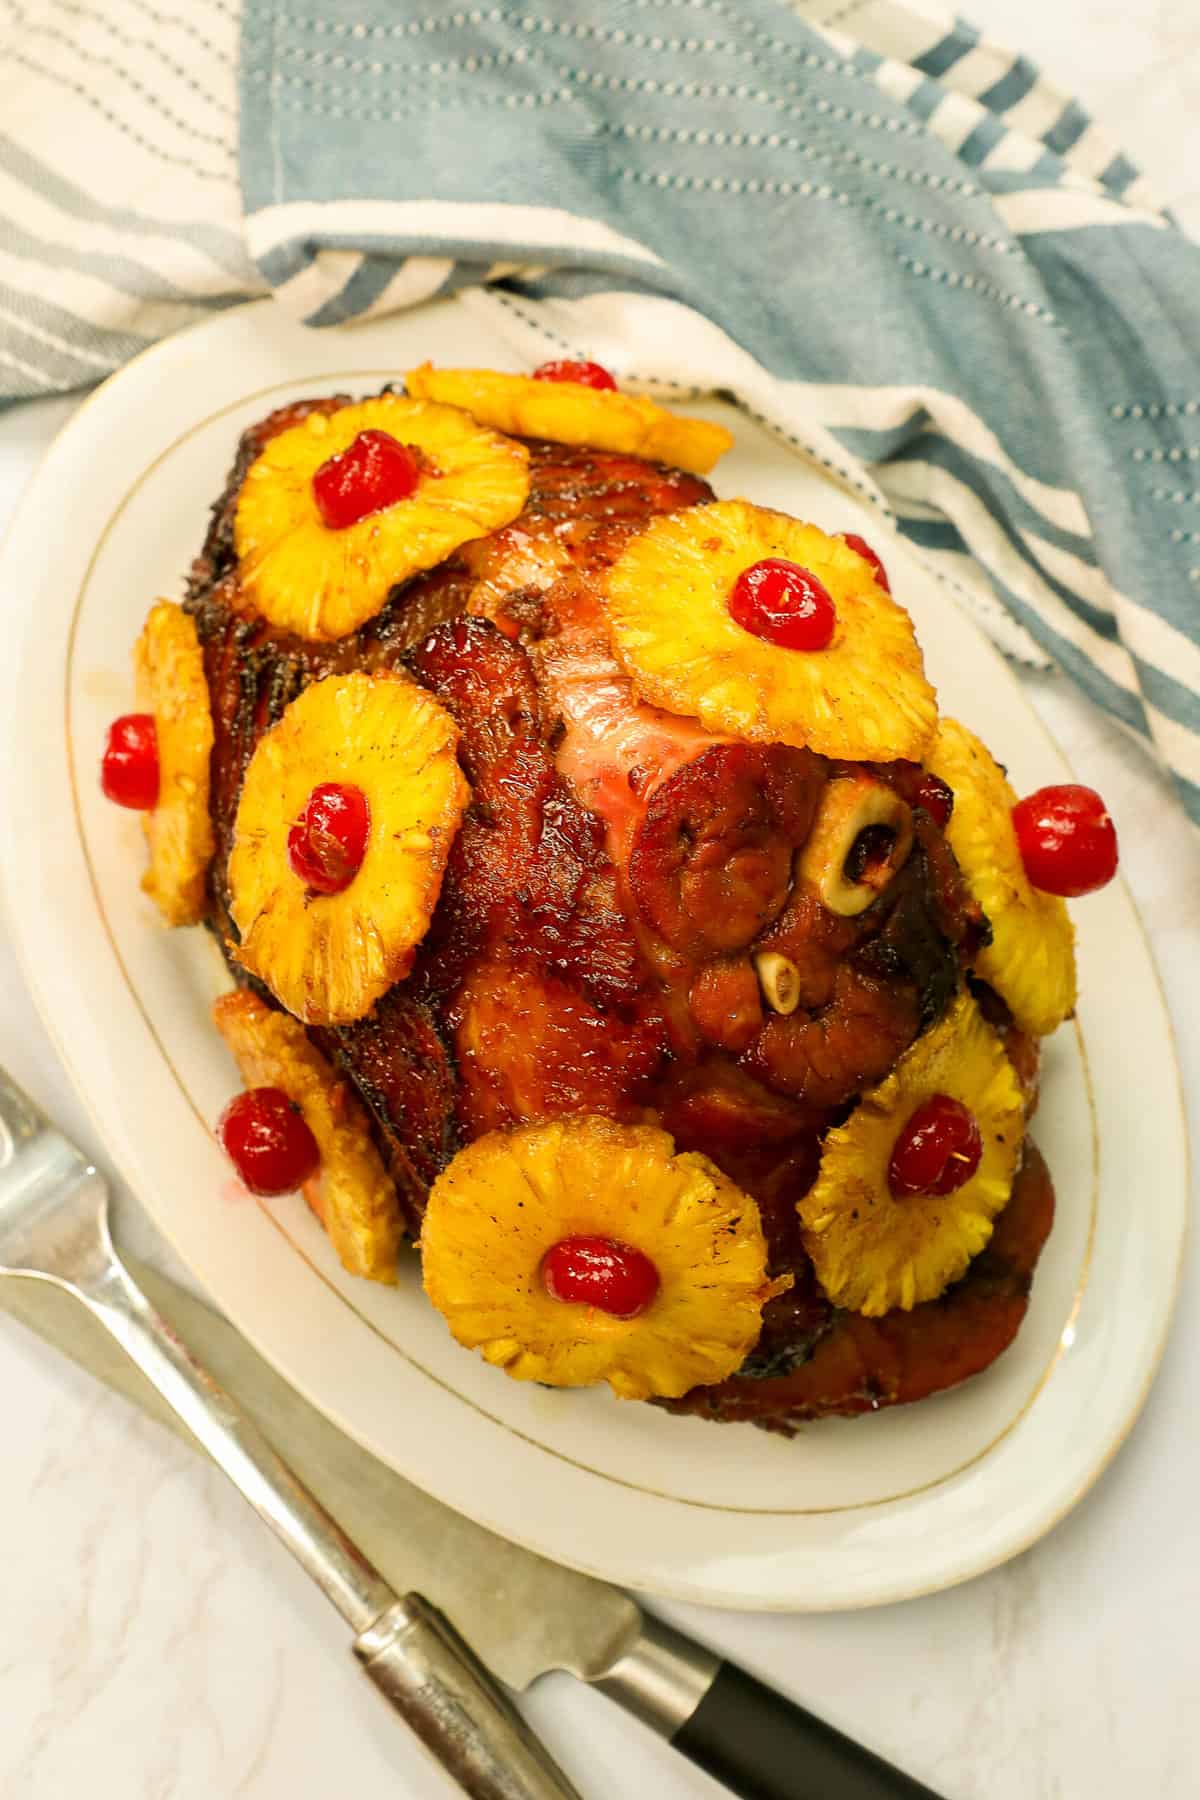 Succulent honey baked ham with caramelized pineapple slices and maraschino cherries